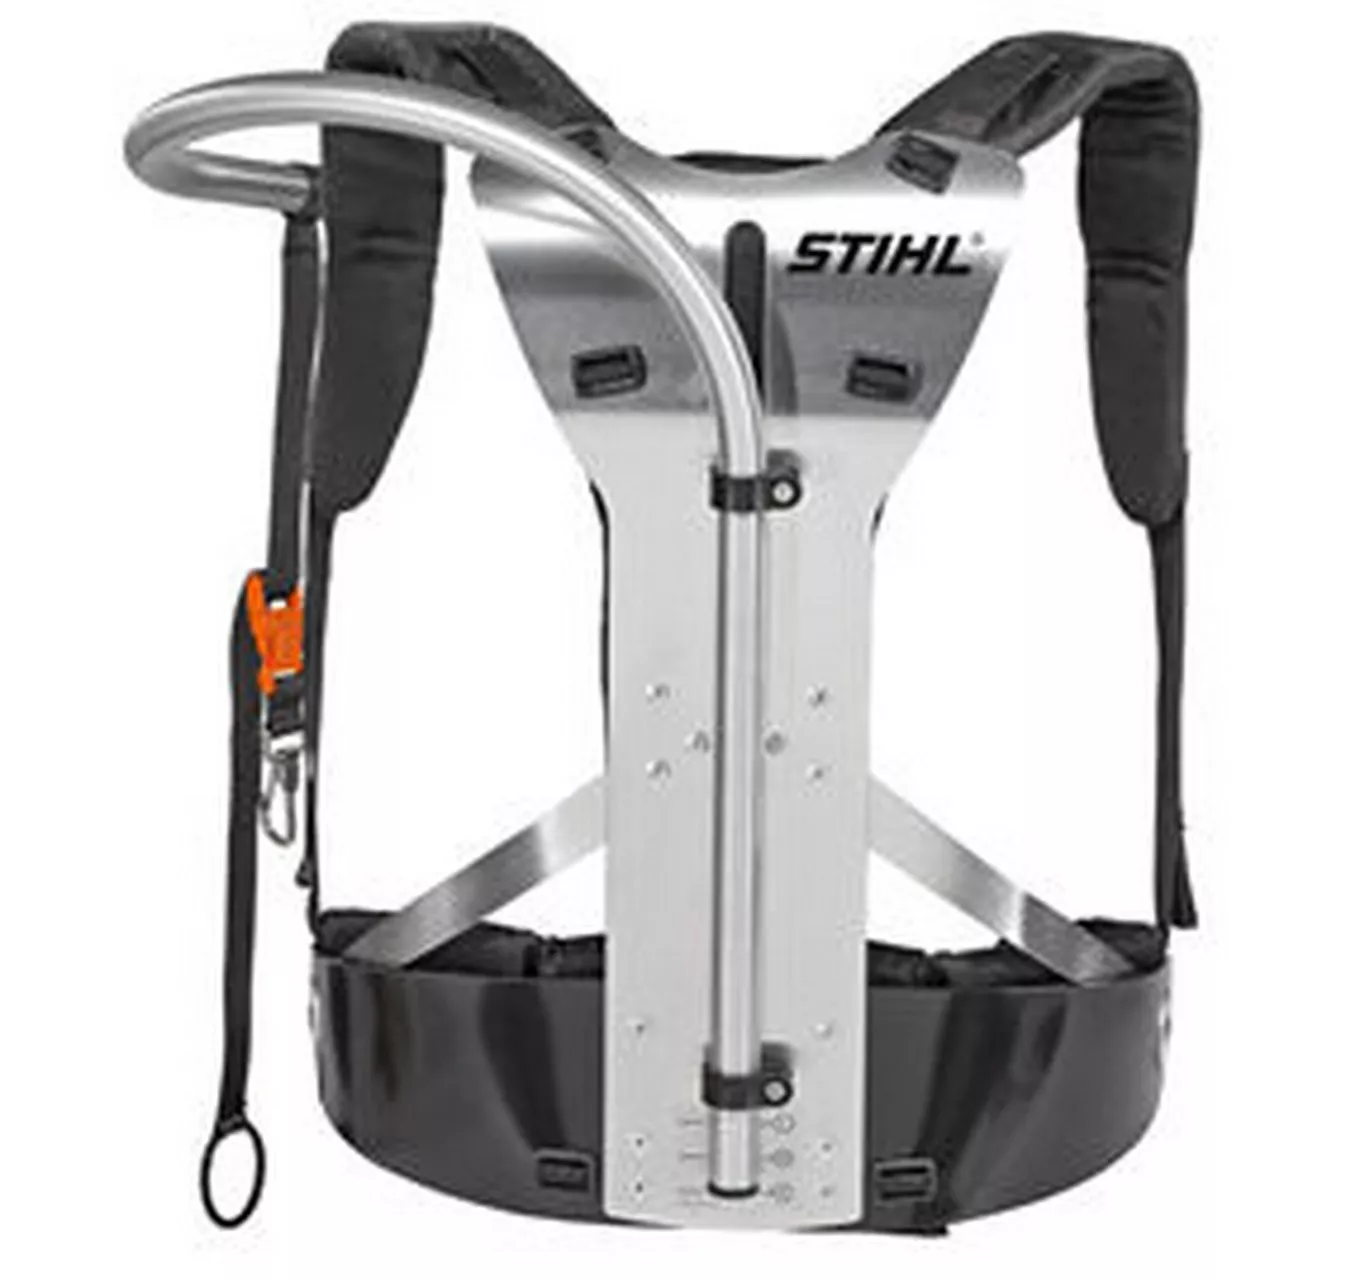 Super Harness For Pole Pruners